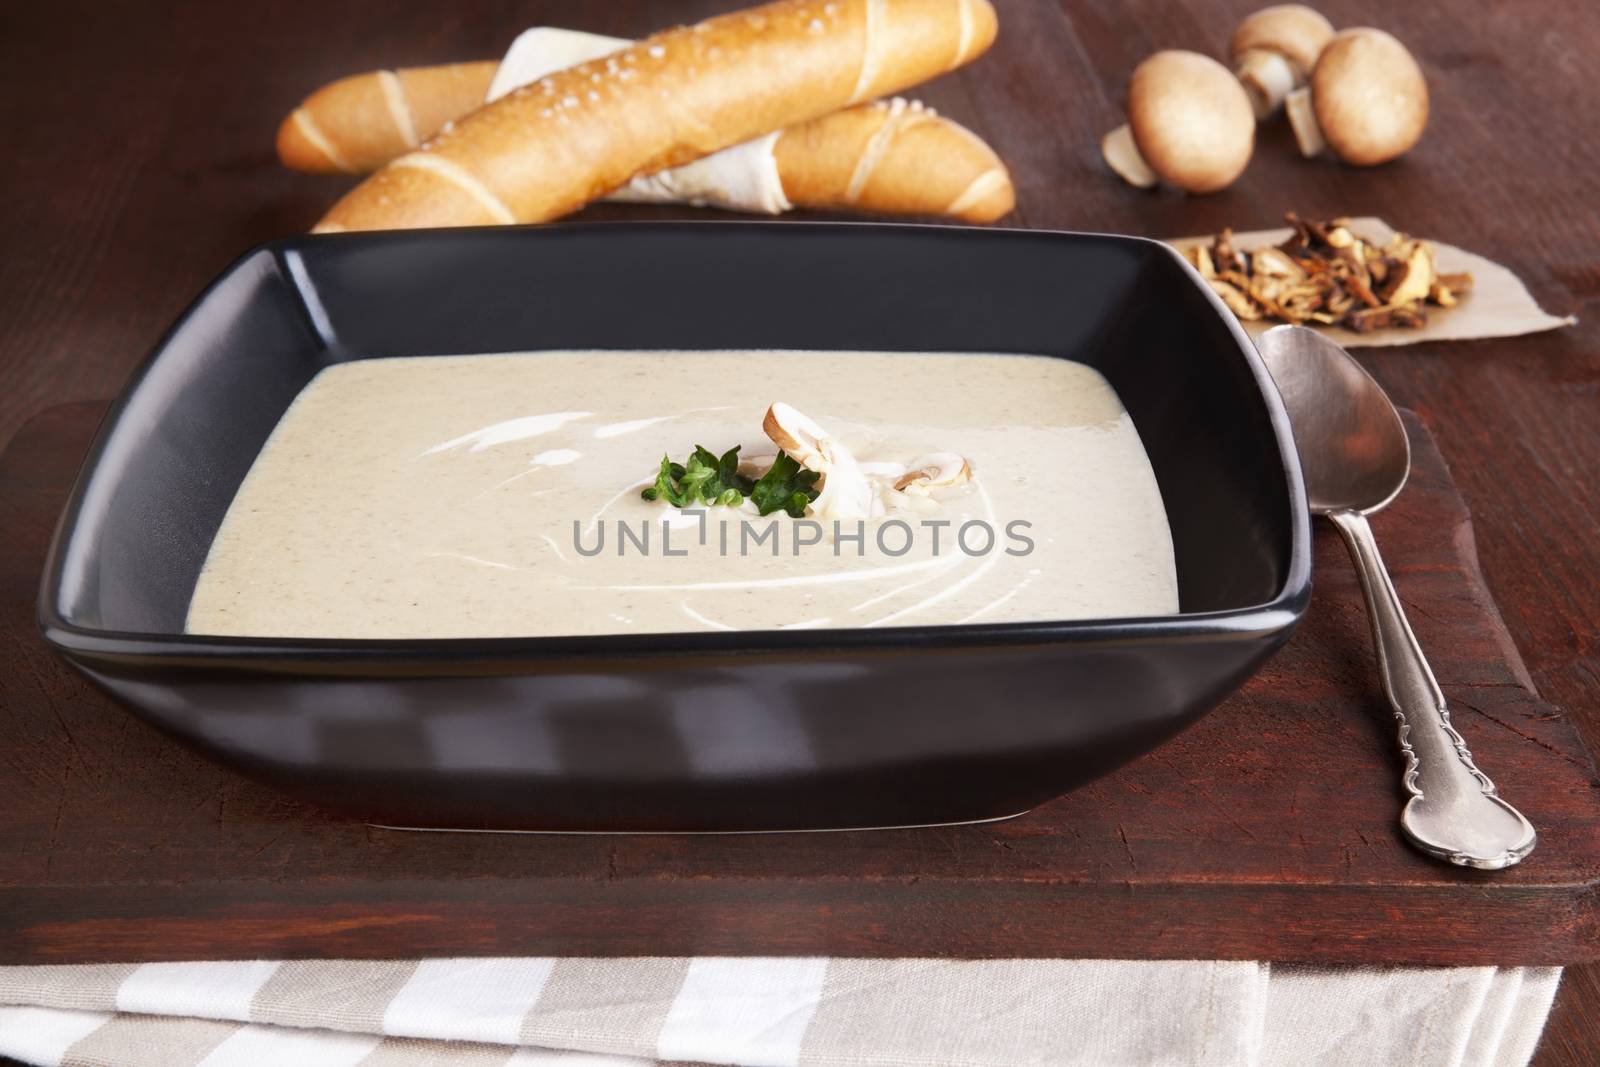 Luxurious champignon cream soup in black bowl. Mushrooms and pastry in background. Culinary eating concept.